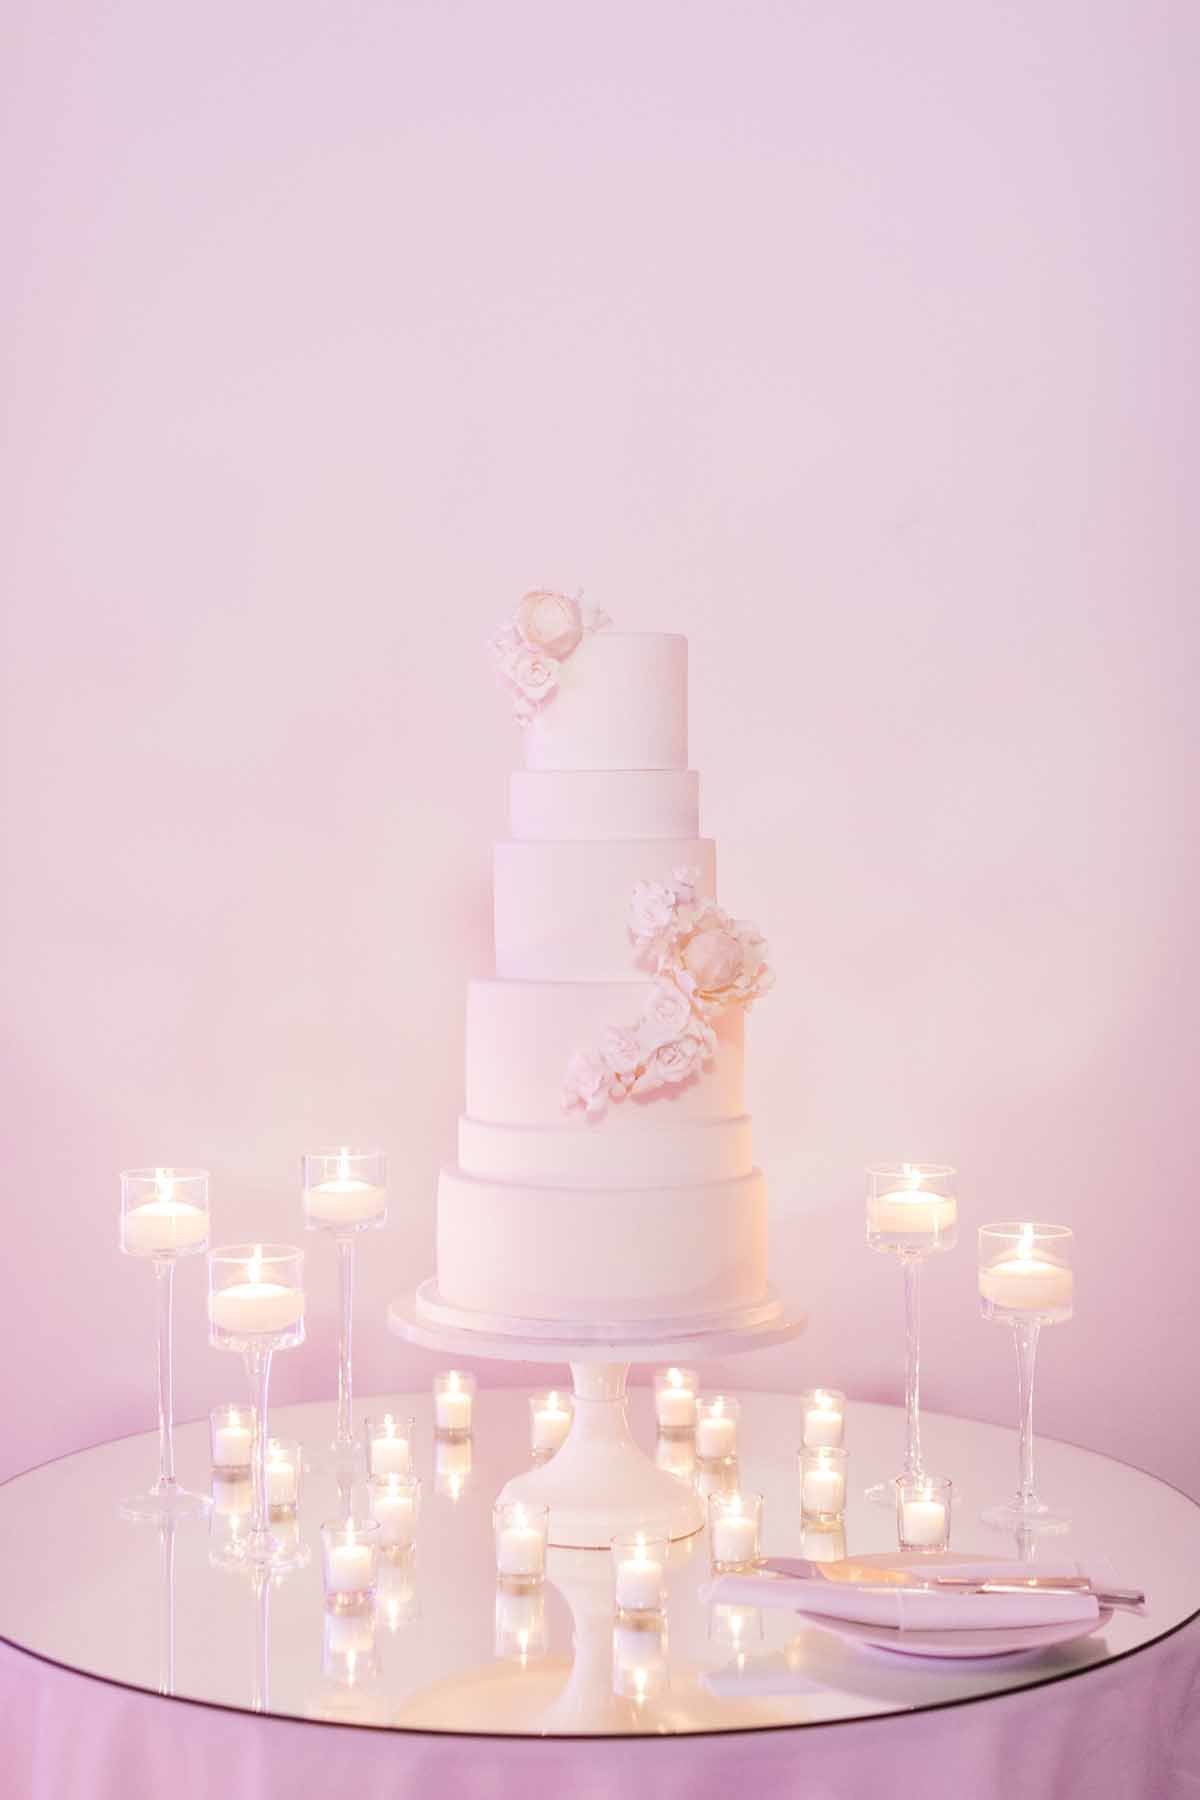 Amazing white tired wedding cake lit by candles on a mirrored table!